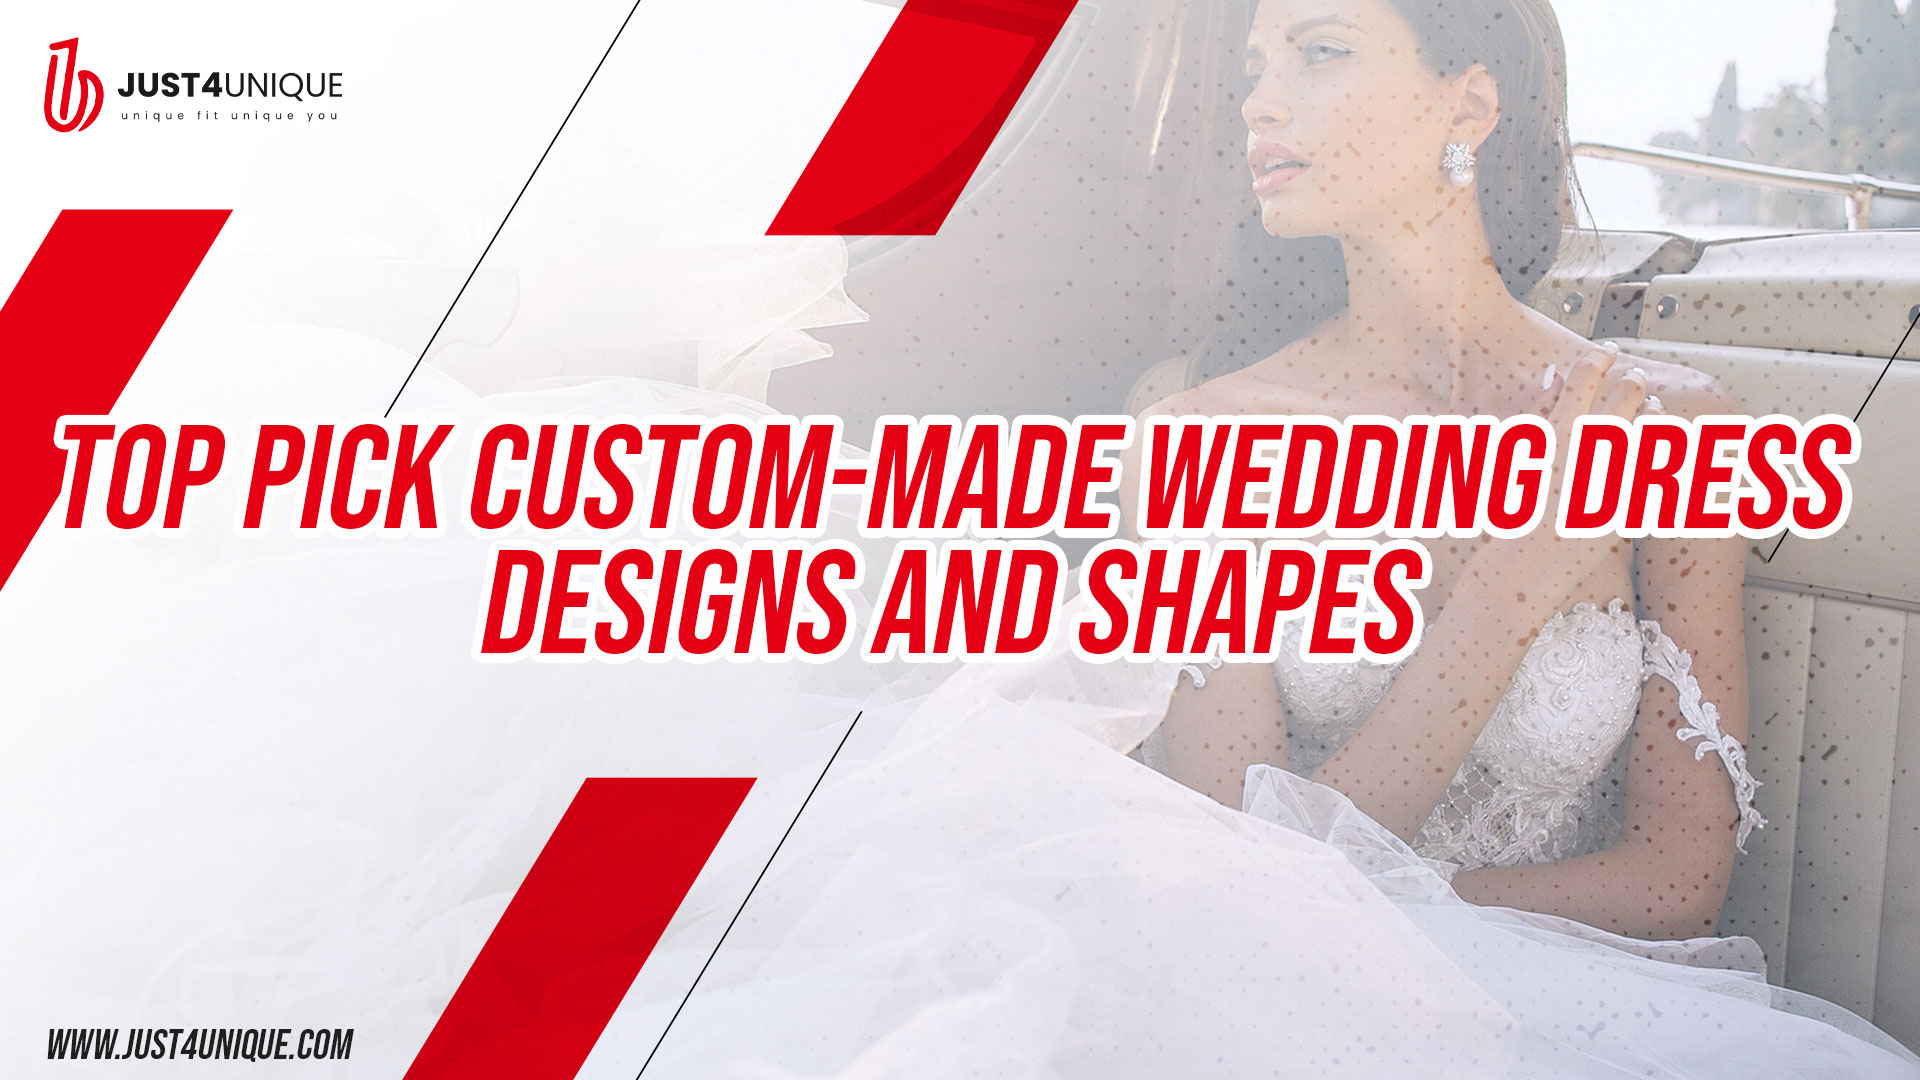 WEDDING DRESS DESIGNS AND SHAPES